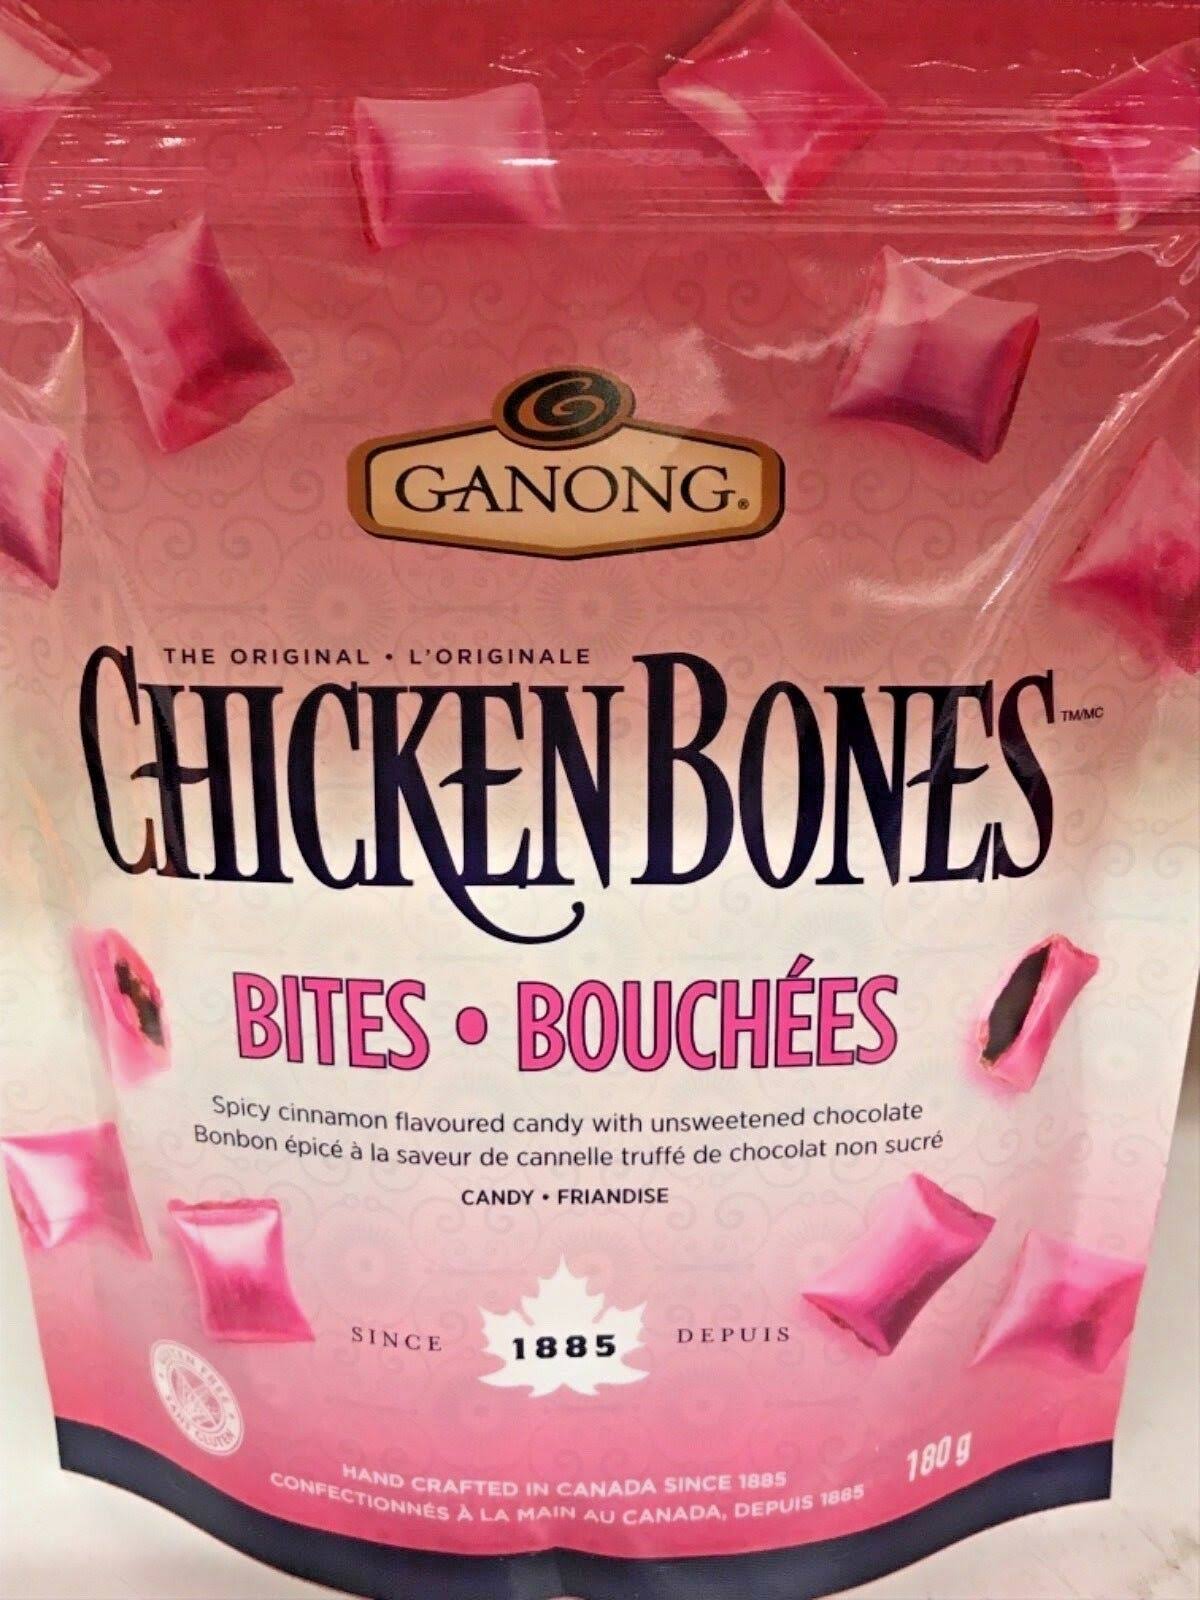 Chicken Bones Canadian Candy Chocolate Cinnamon Shell Ganong from Canada